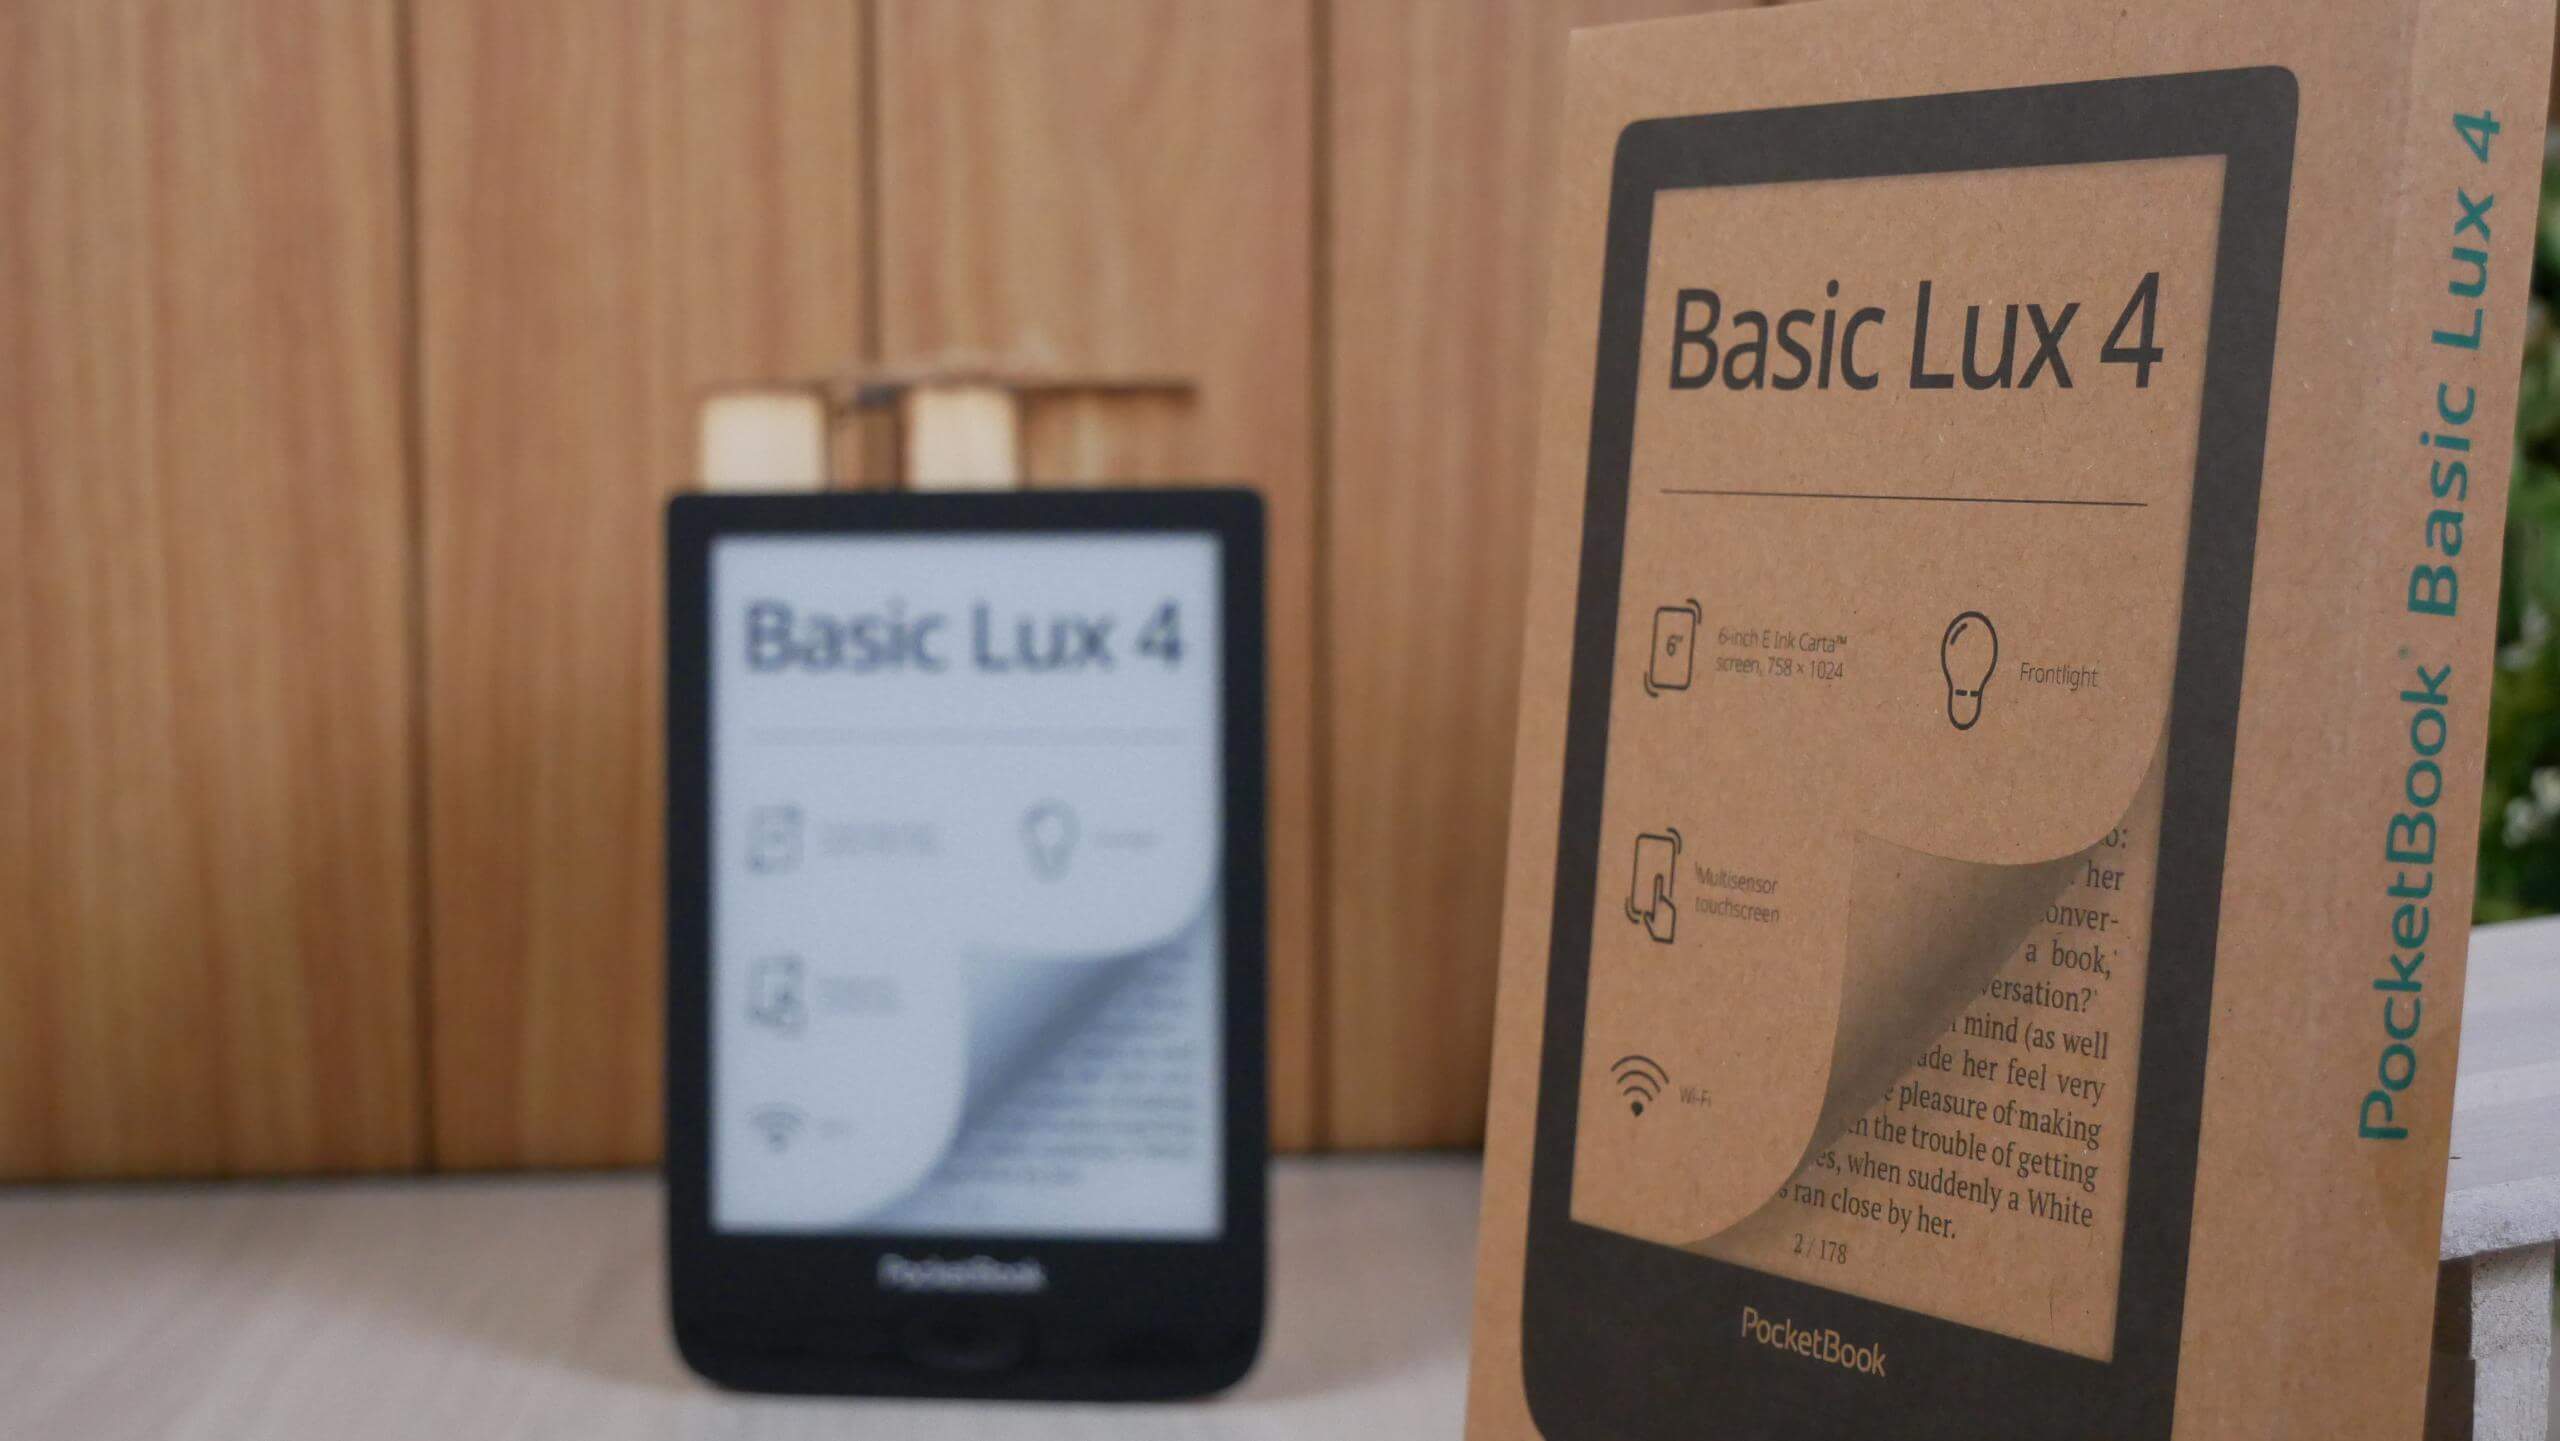 Basic 4 First Lux look Good at Pocketbook e-Reader the -